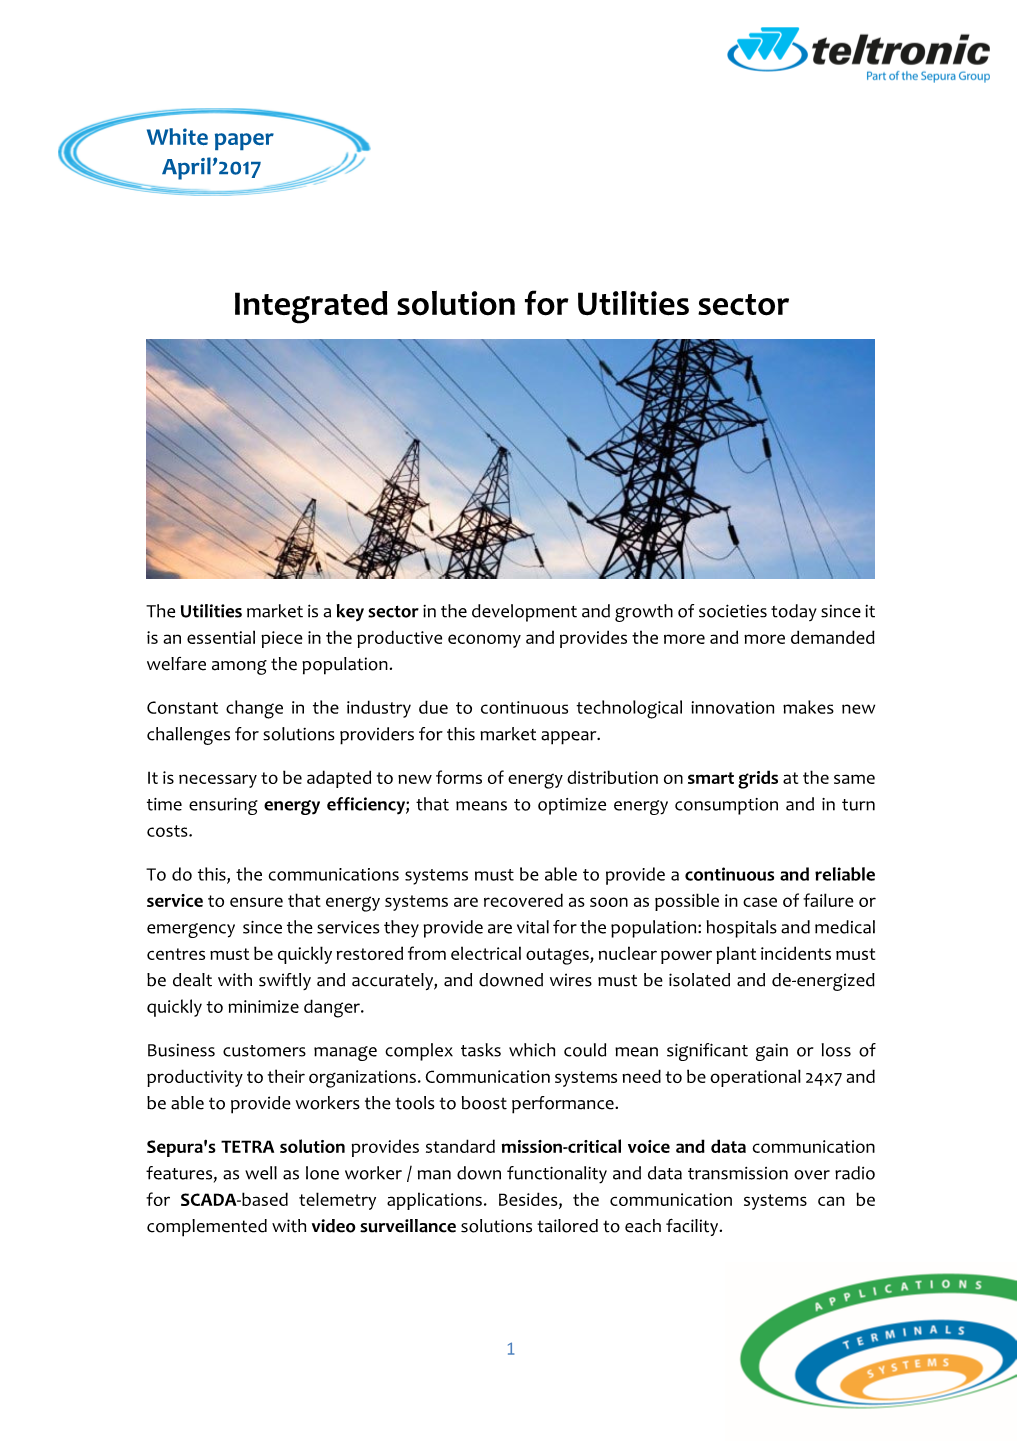 Integrated Solution for Utilities Sector